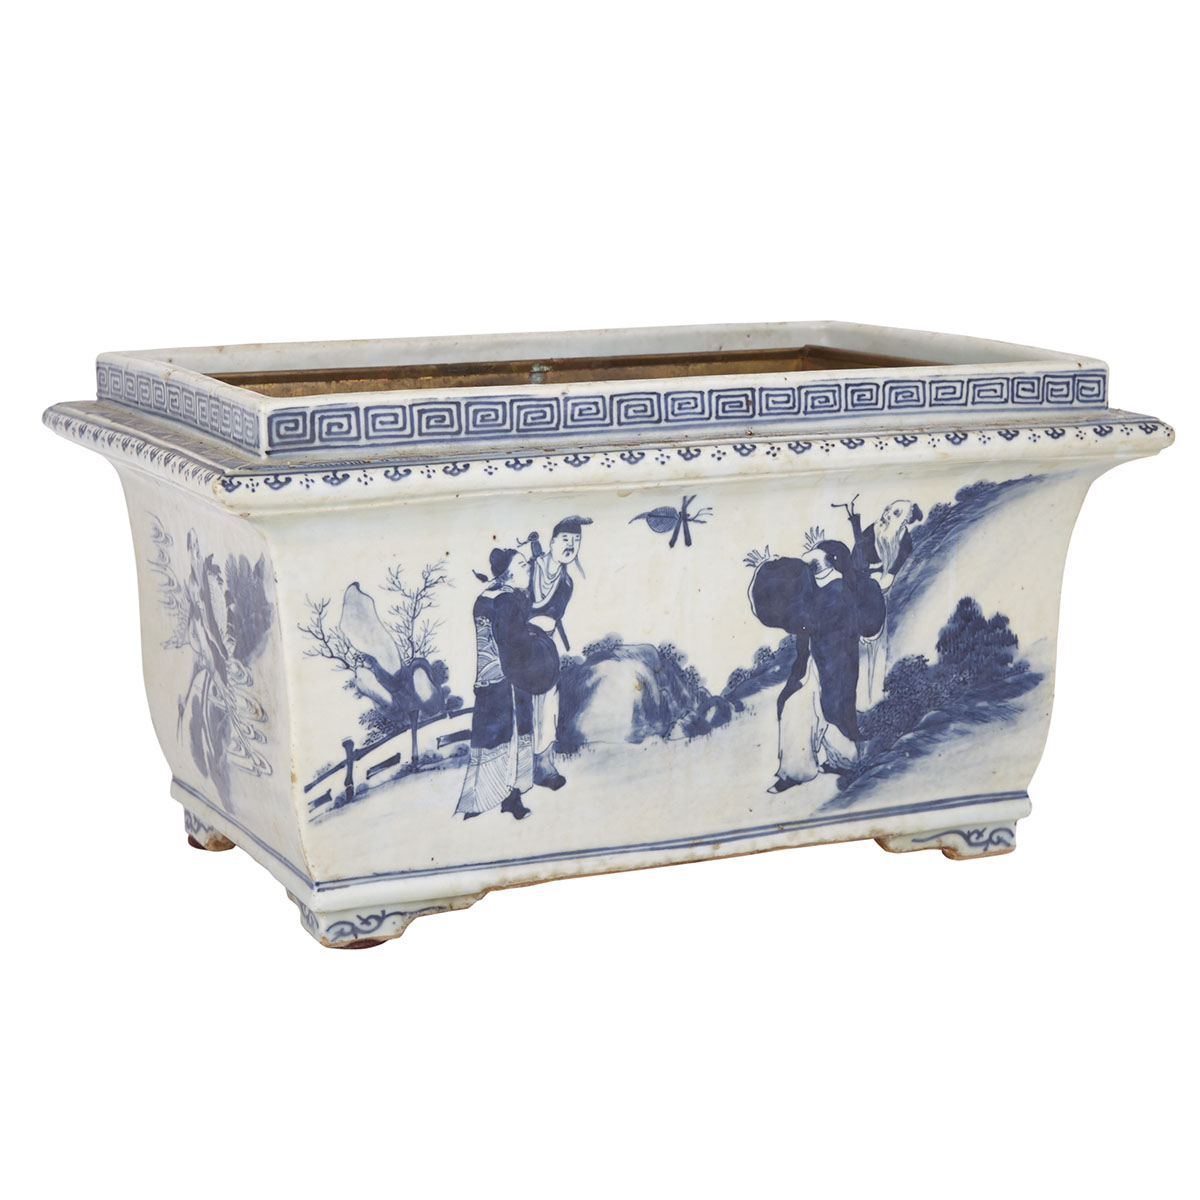 A Rectangular Blue and White Figural Planter, 19th Century